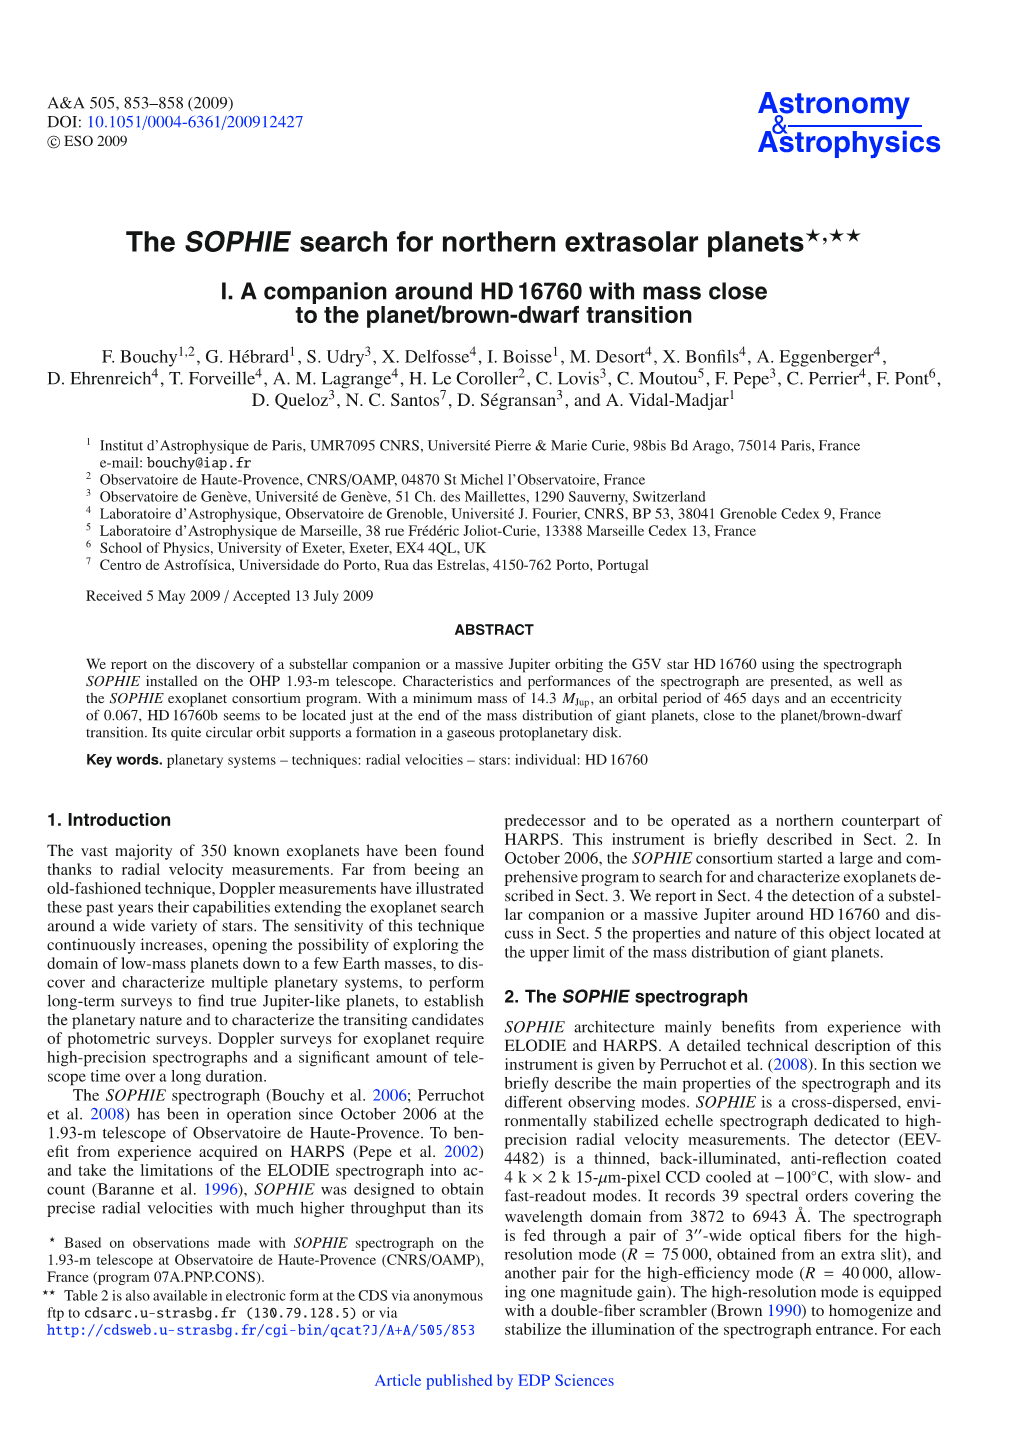 The SOPHIE Search for Northern Extrasolar Planets�,